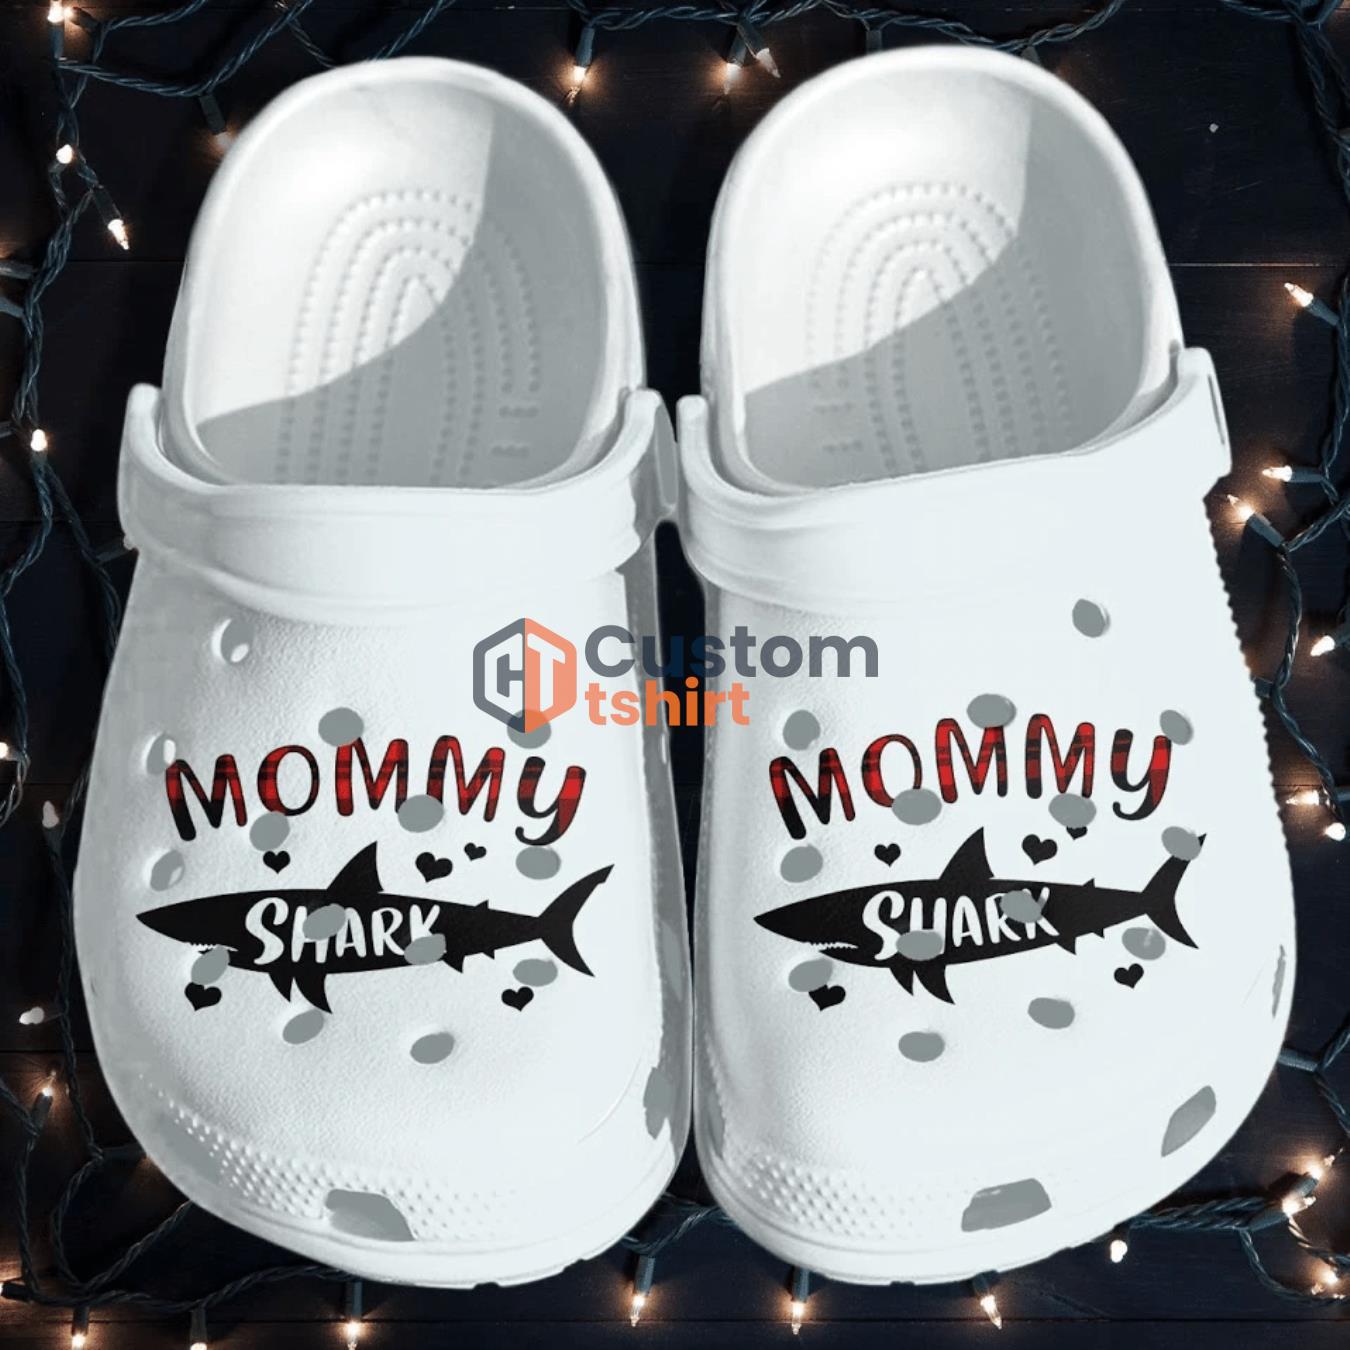 Mommy Shark Clog Shoes - Funny Shark Gifts For Mom Mothers Day 2022 Product Photo 1 Product photo 1